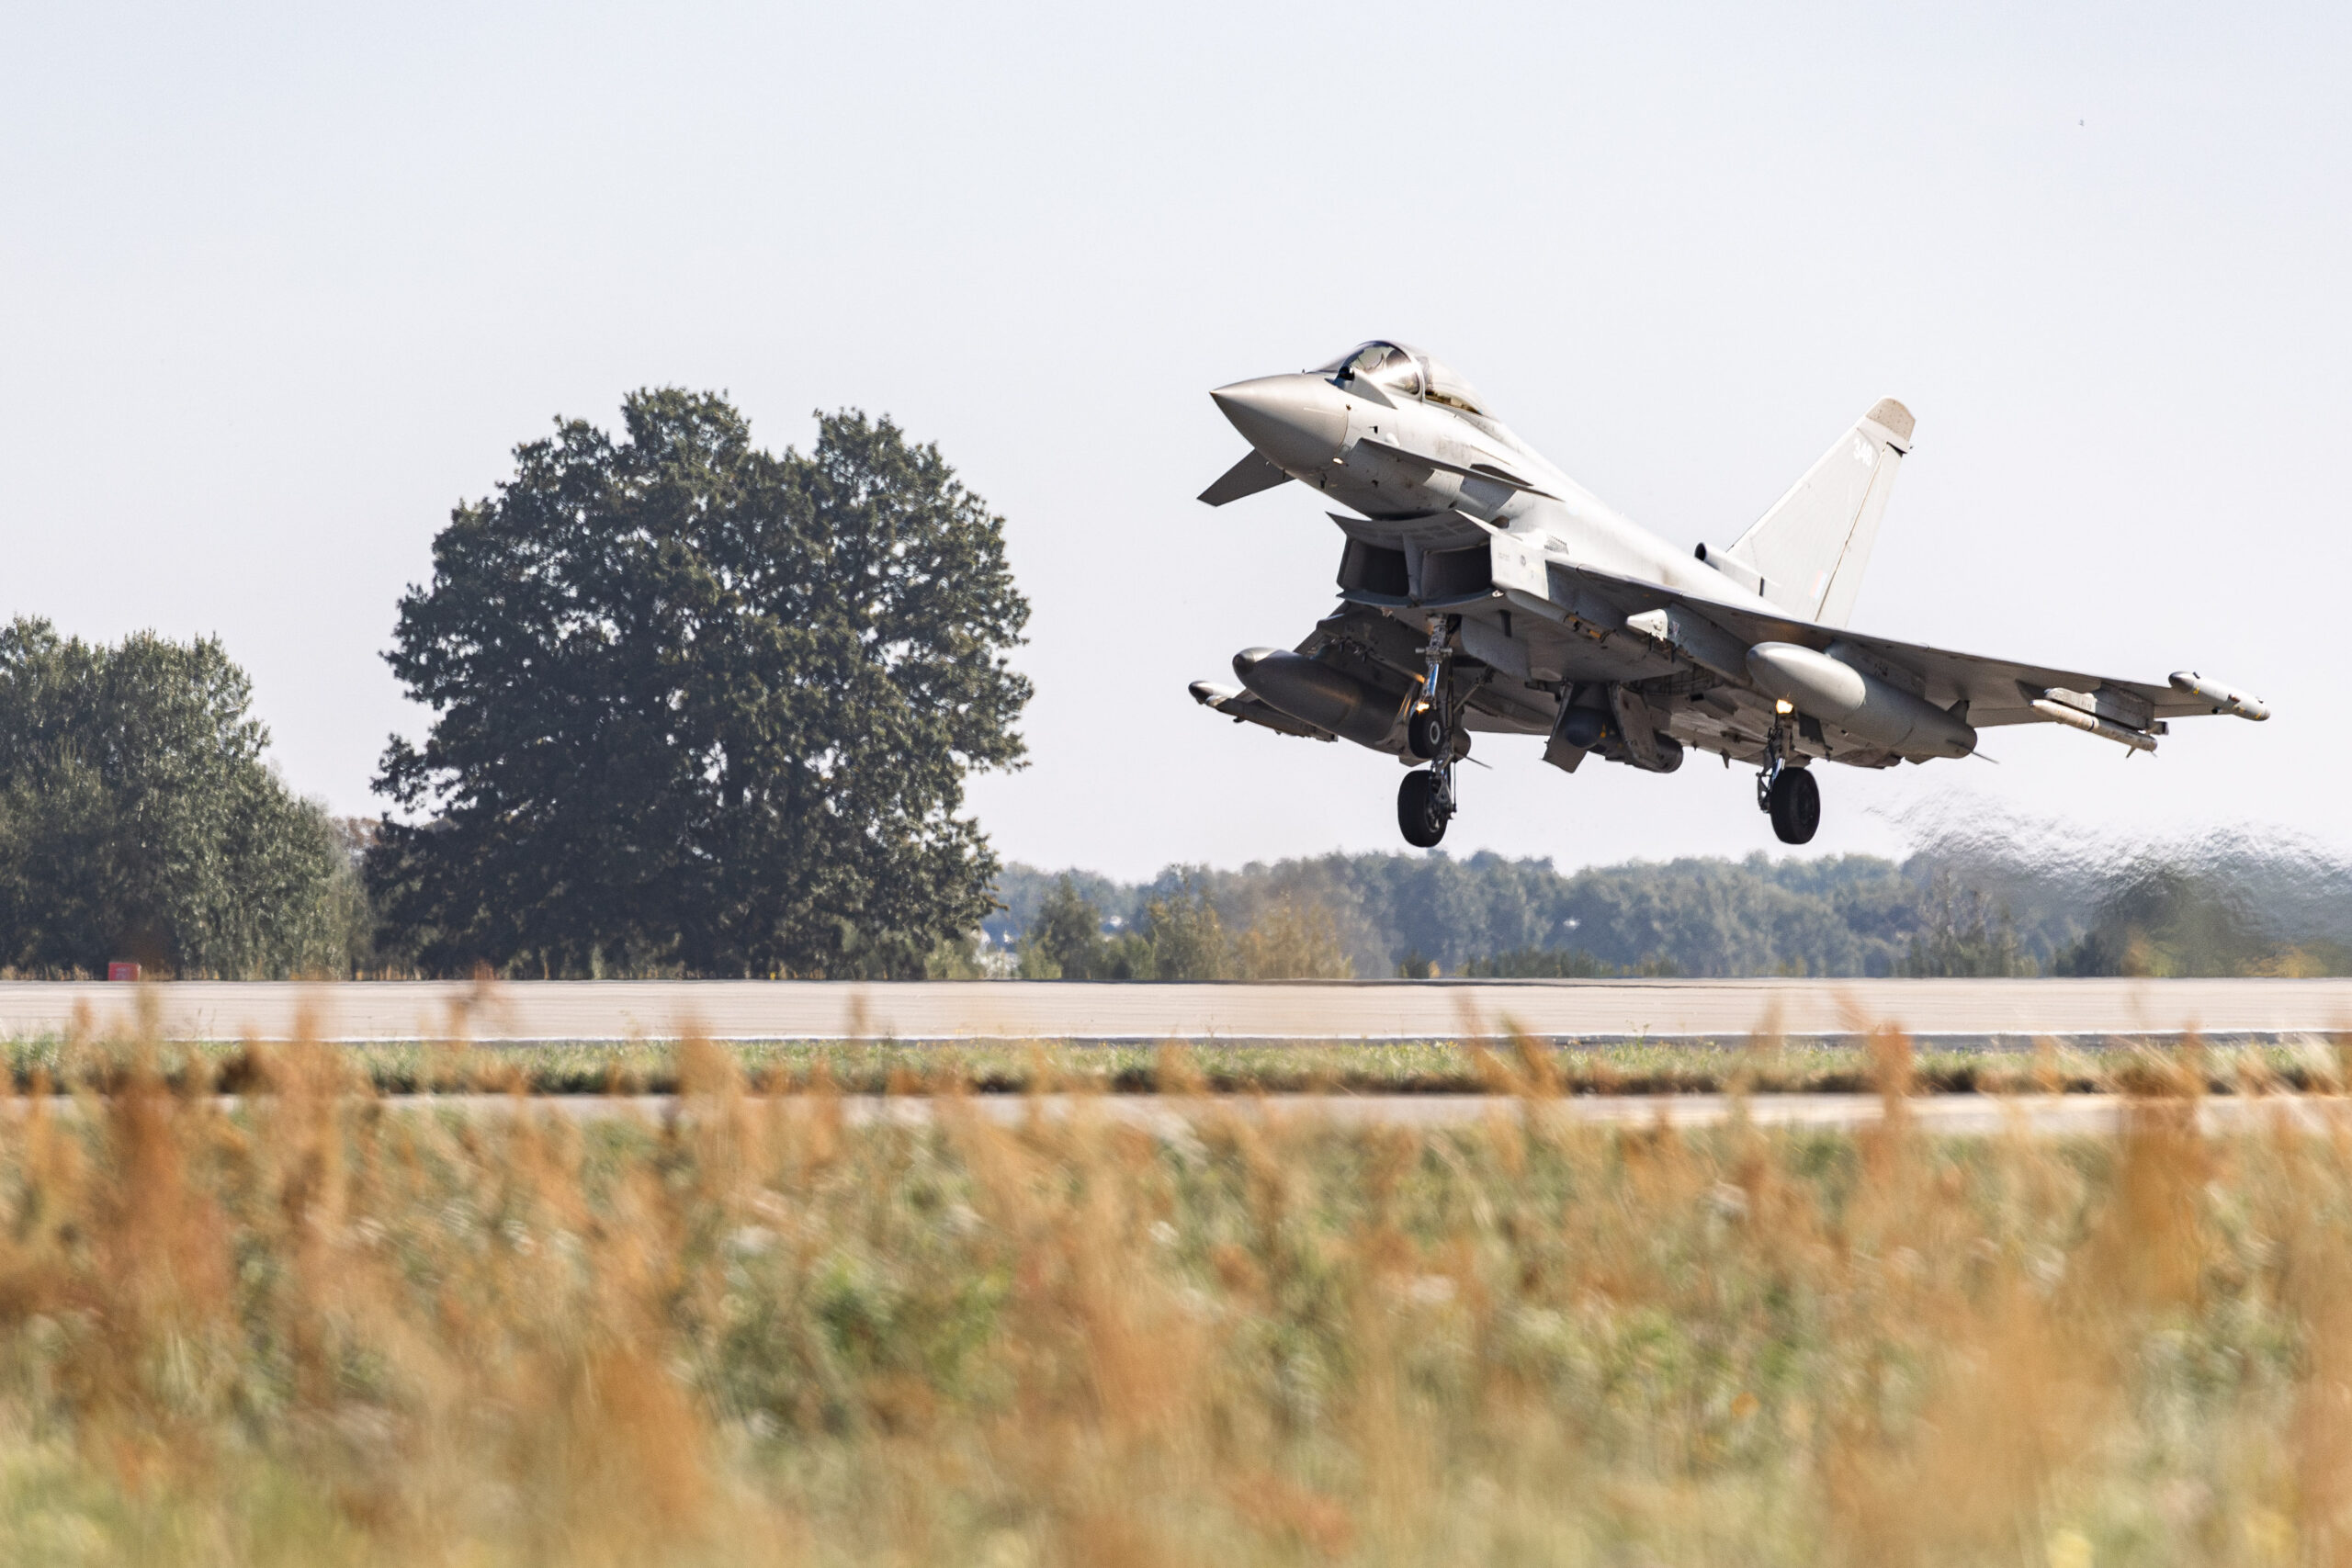 A UK Royal Air Force Lockheed Martin F-35 jet is seen taking off. A tree is on the left, serving as the background. A field of grass serves as the foreground, cut off from the background by what appears to be a concrete runway.